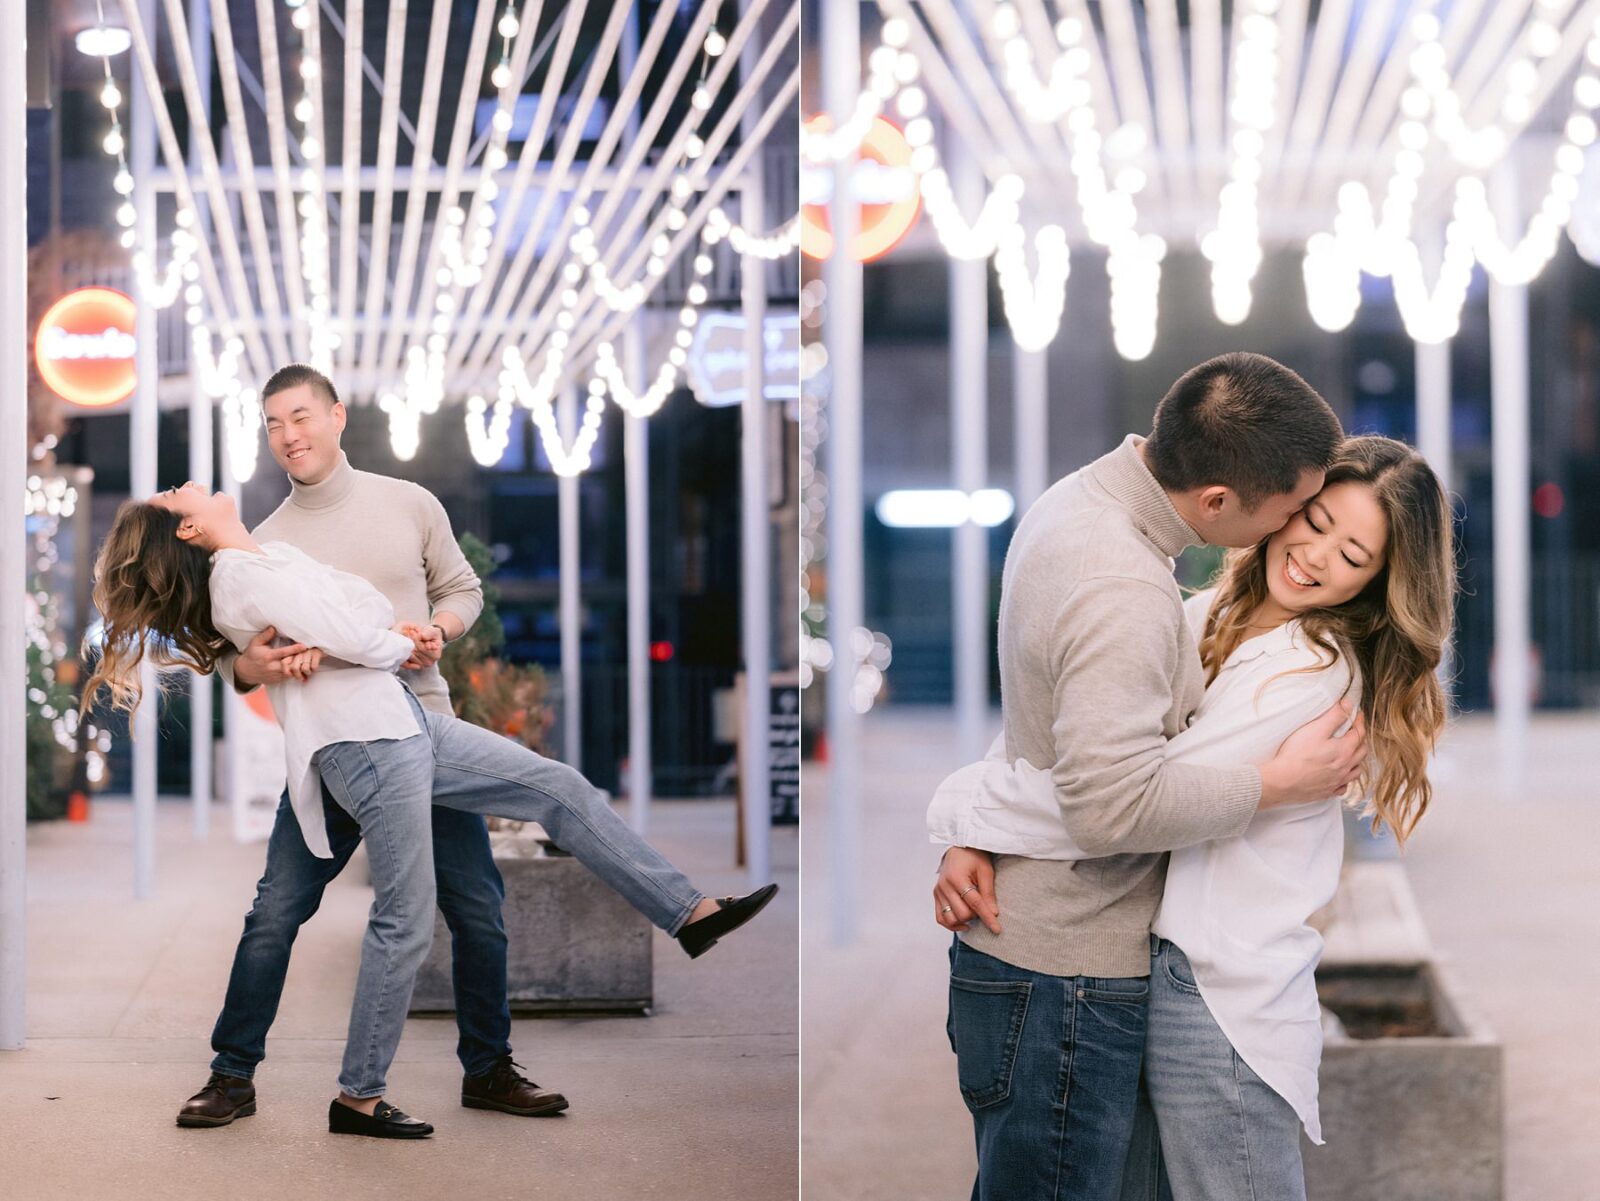 south congress engagement session locations, string light engagement photos, night time engagement session, engagement session at night, austin engagement photos, candid couple, neutral engagement session outfit, photos by Tara Lyons Photography, austin wedding photographer